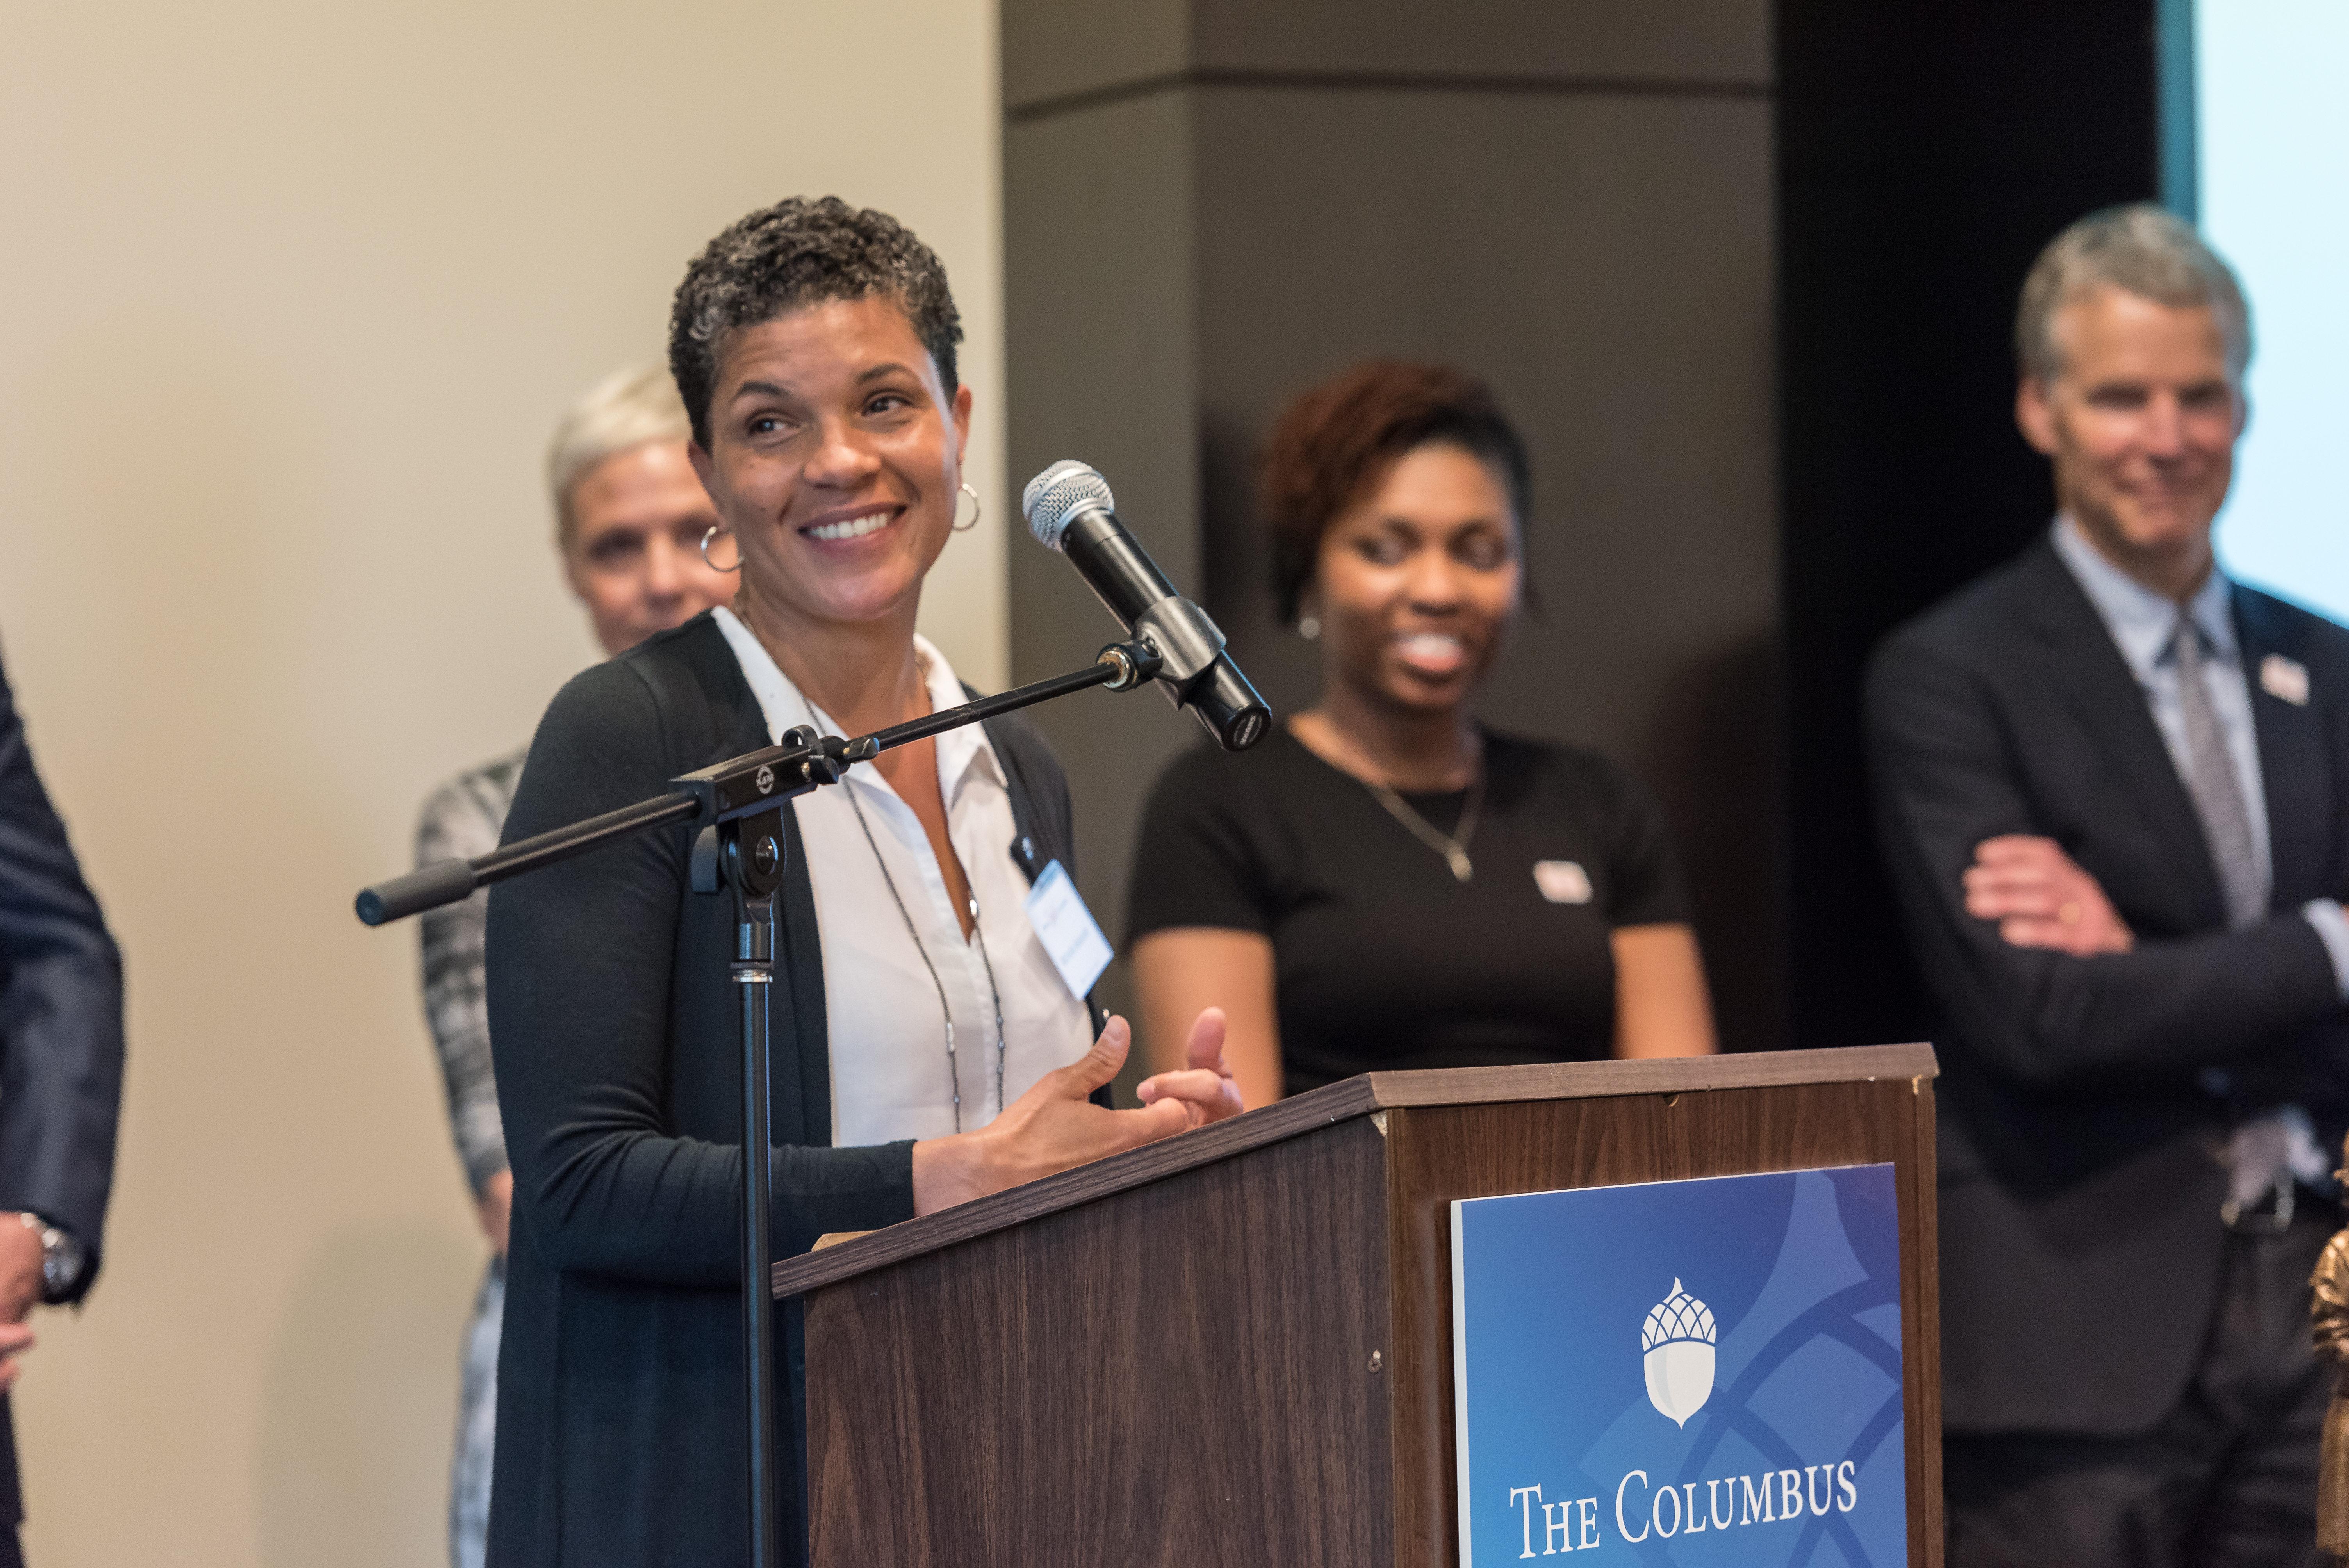 Michelle Alexander, legal scholar, advocate, civil rights attorney, and author of the groundbreaking book, The New Jim Crow: Mass Incarceration in the Age of Colorblindness, the 2017 winner of The Spirit of Columbus Award. 